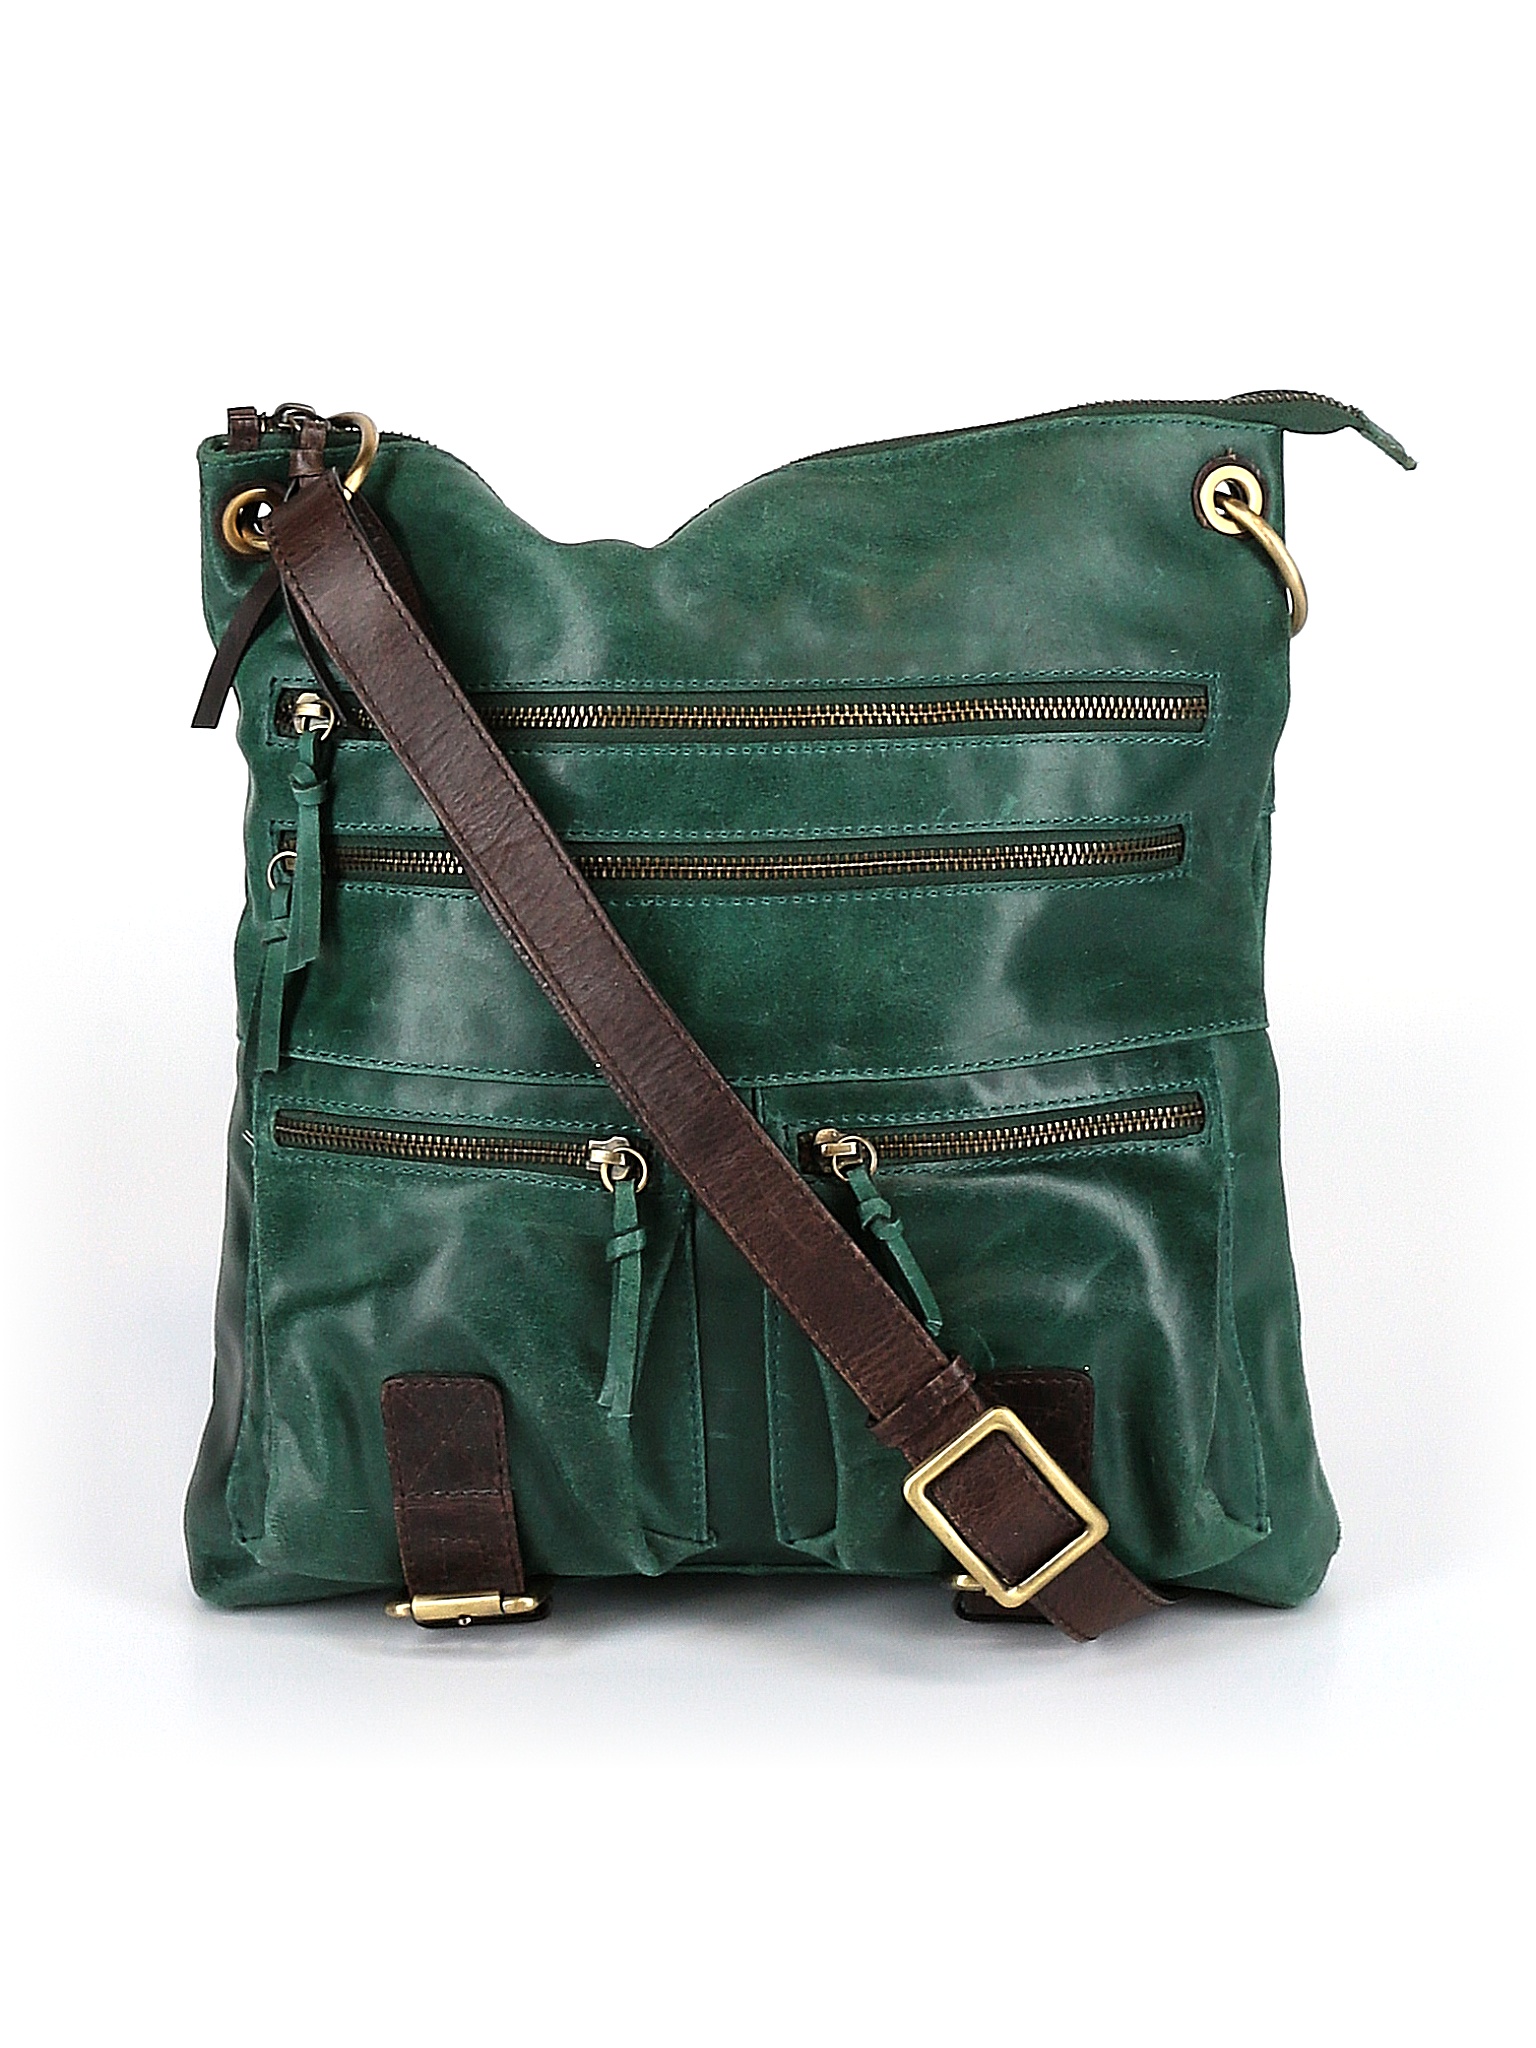 Nino Bossi 100% Leather Solid Green Teal Leather Crossbody Bag One Size ...